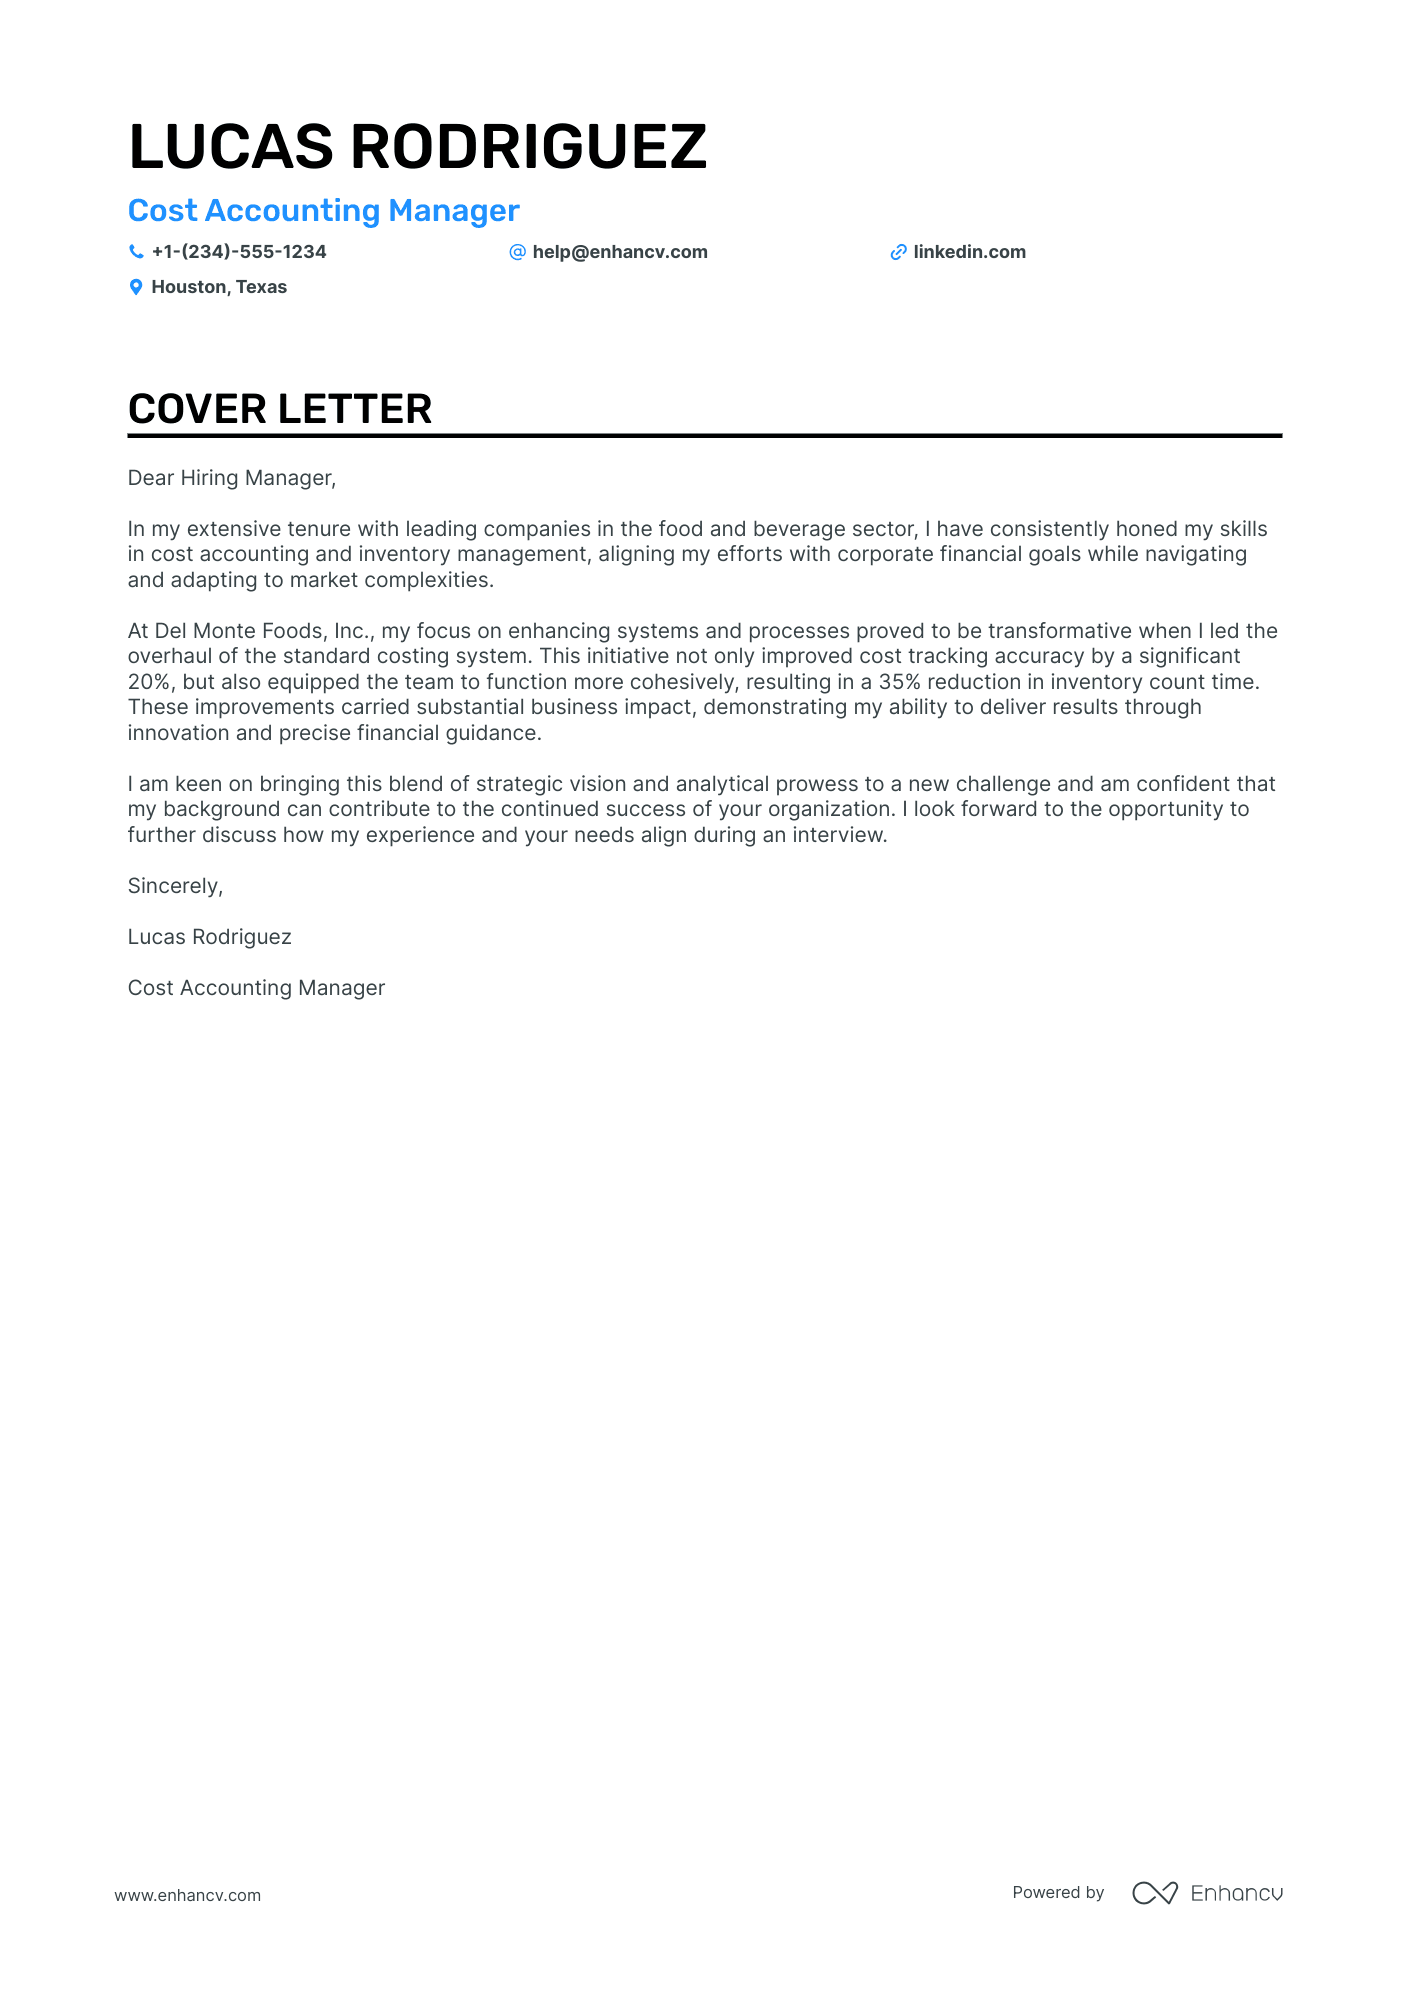 Cost Accounting cover letter